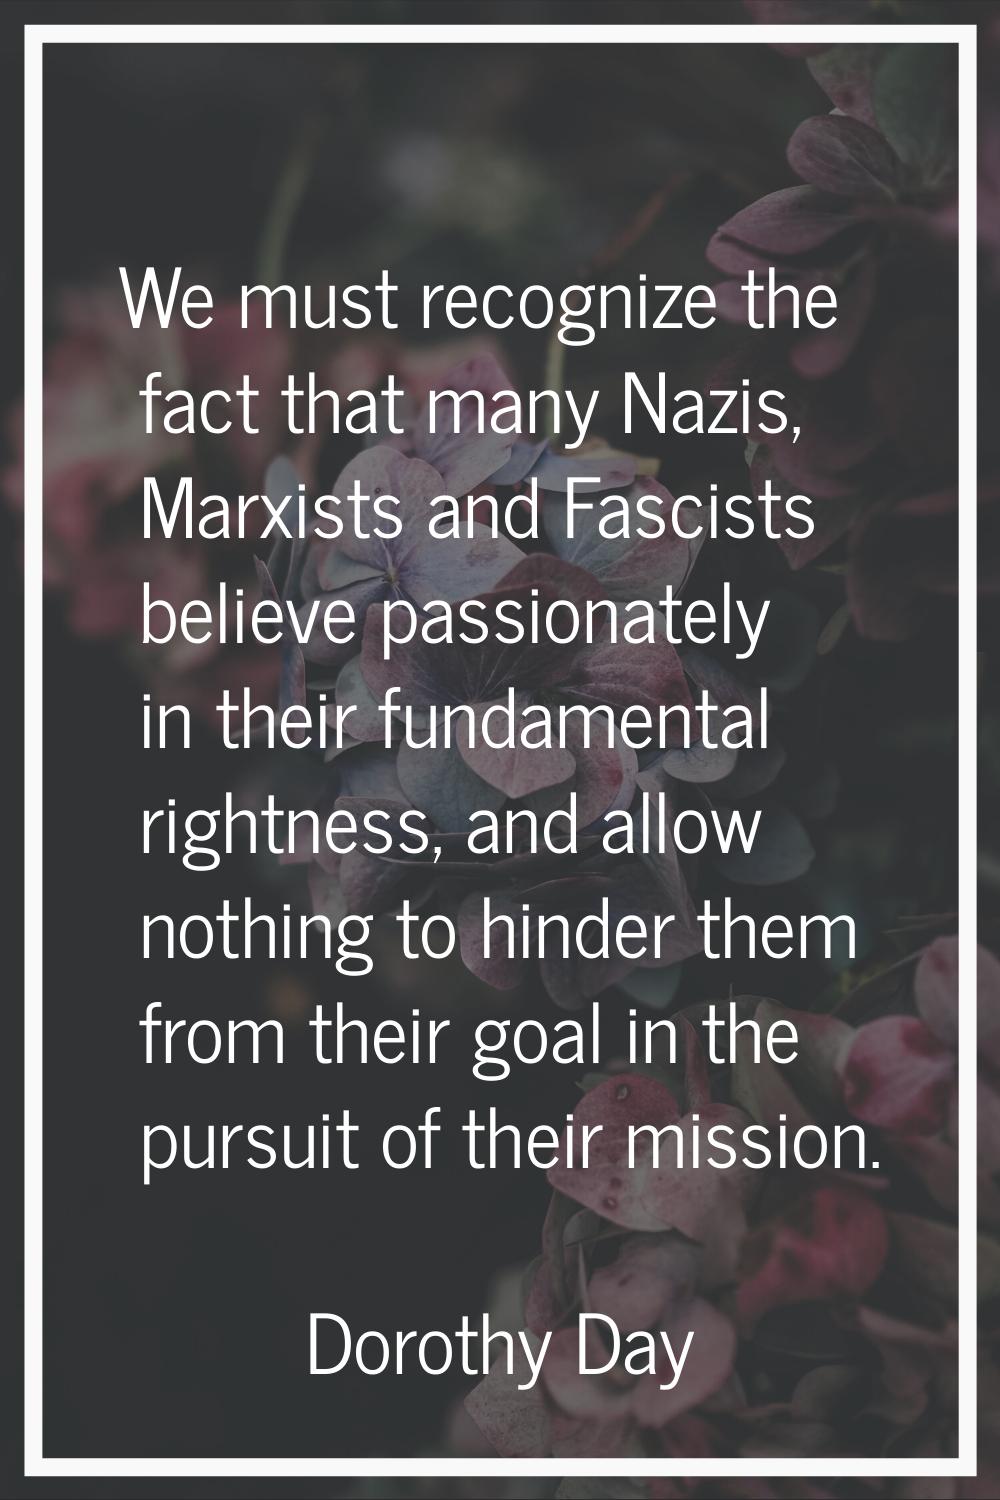 We must recognize the fact that many Nazis, Marxists and Fascists believe passionately in their fun